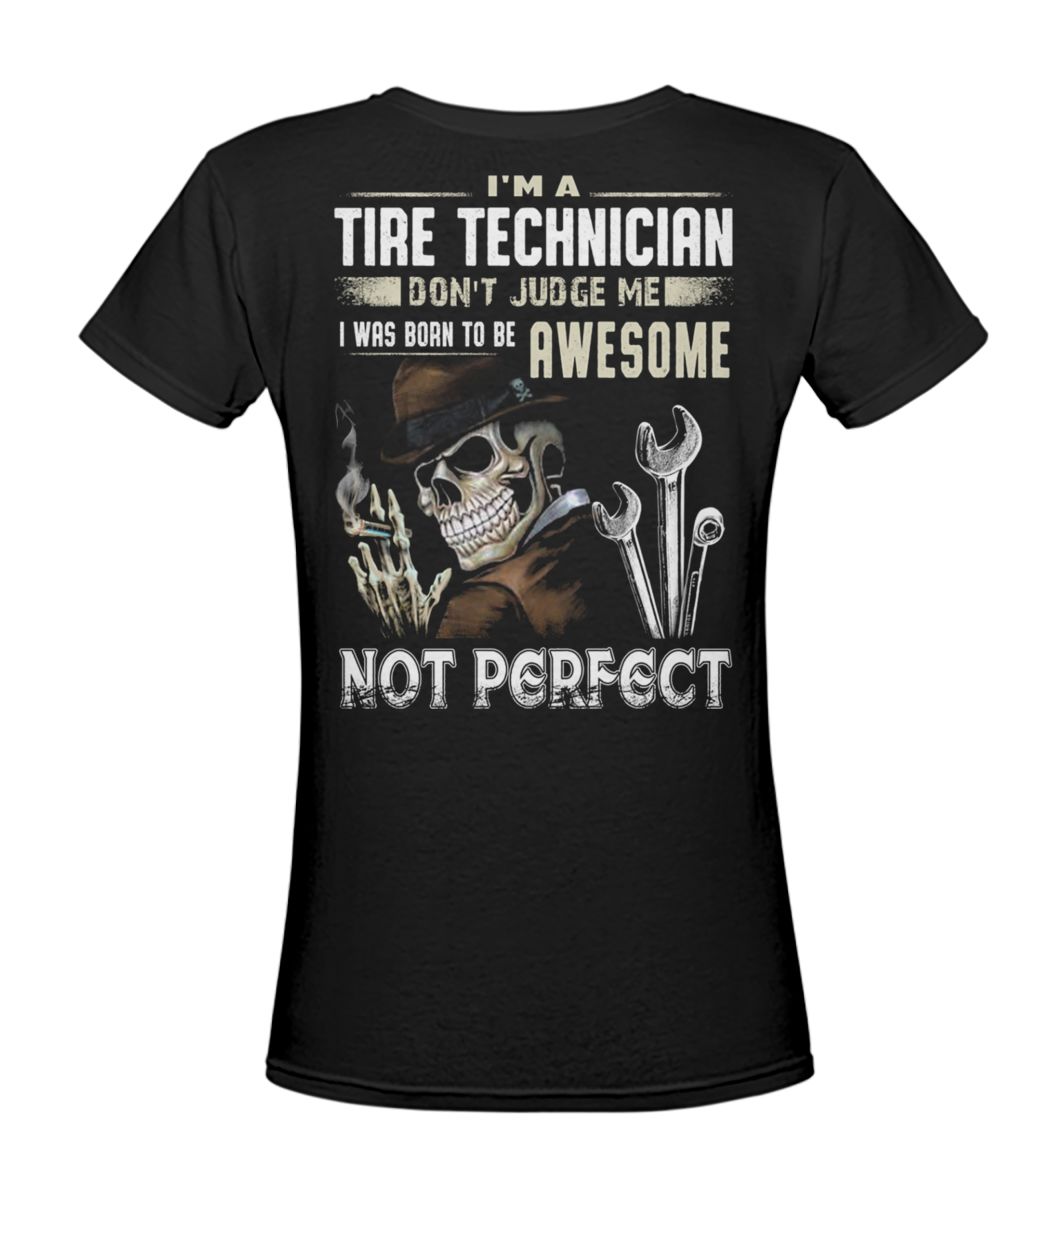 I'm a tire technician don't judge me I was born to be awesome not perfect women's v-neck